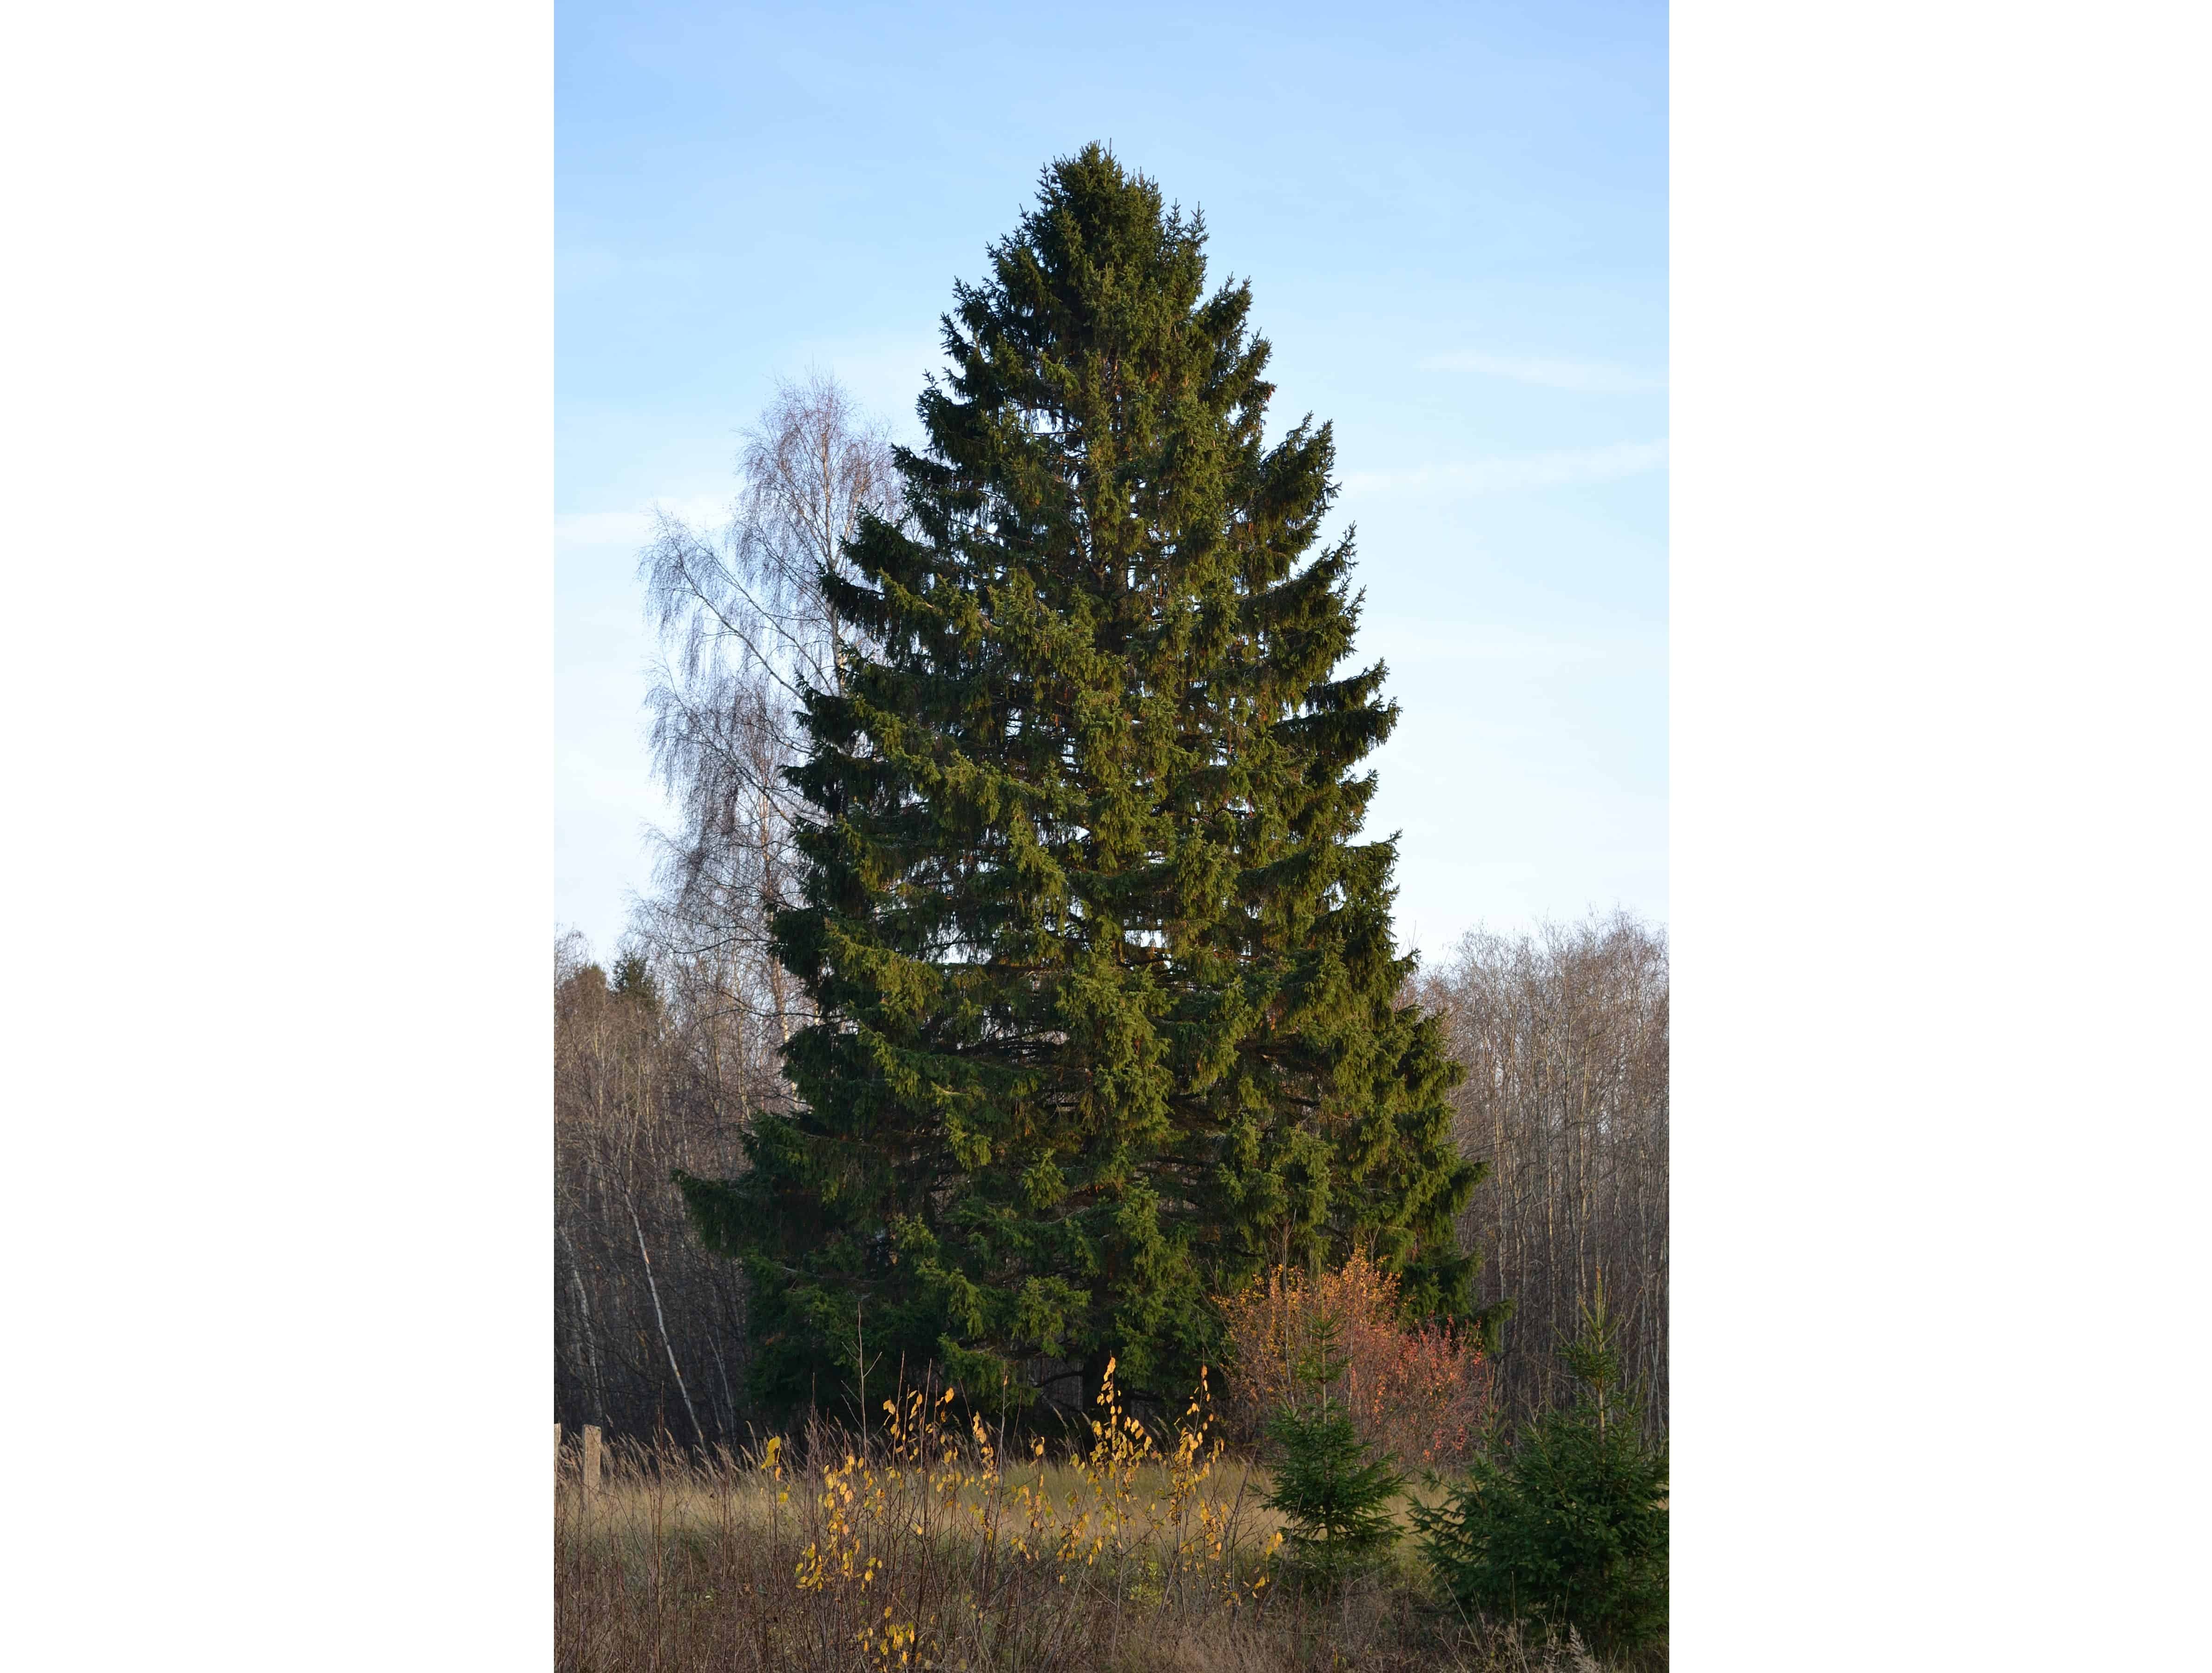 A Norway spruce in the wild. Image credits: Ivar Leidus